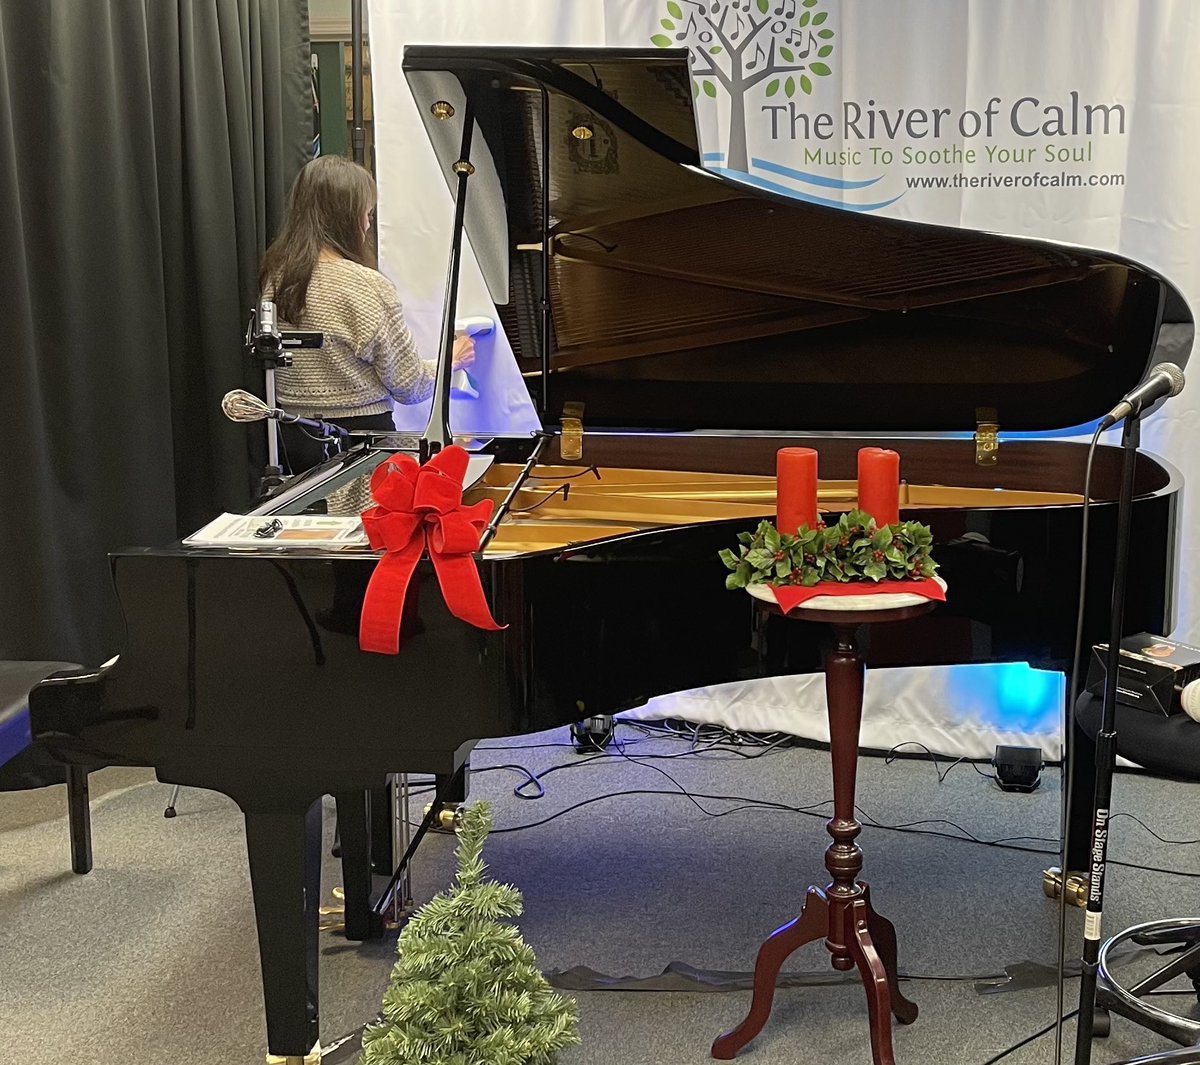 Concert starts at 7pm central time. Tap the link in my Twitter bio on where to watch the livestream. #piano #holiday #concert #theriverofcalm